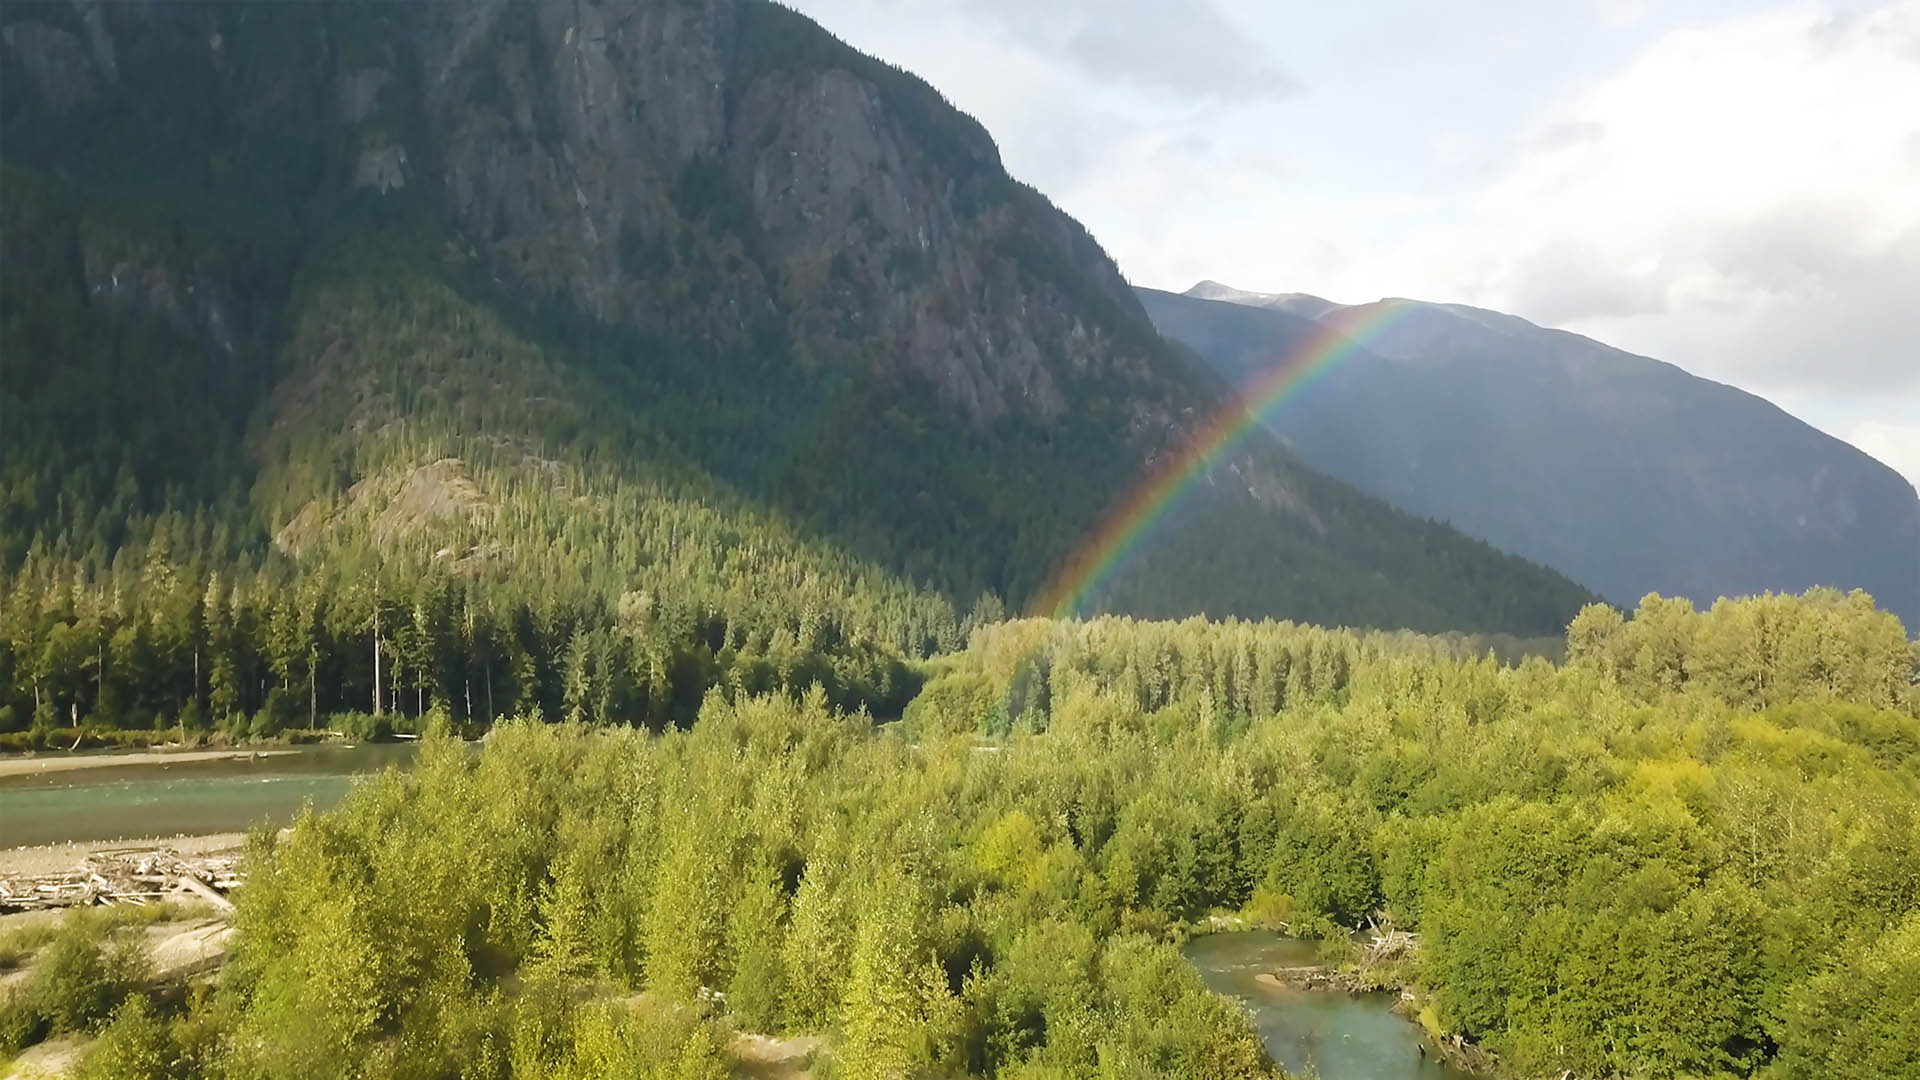 Rainbow in mountains, Canada